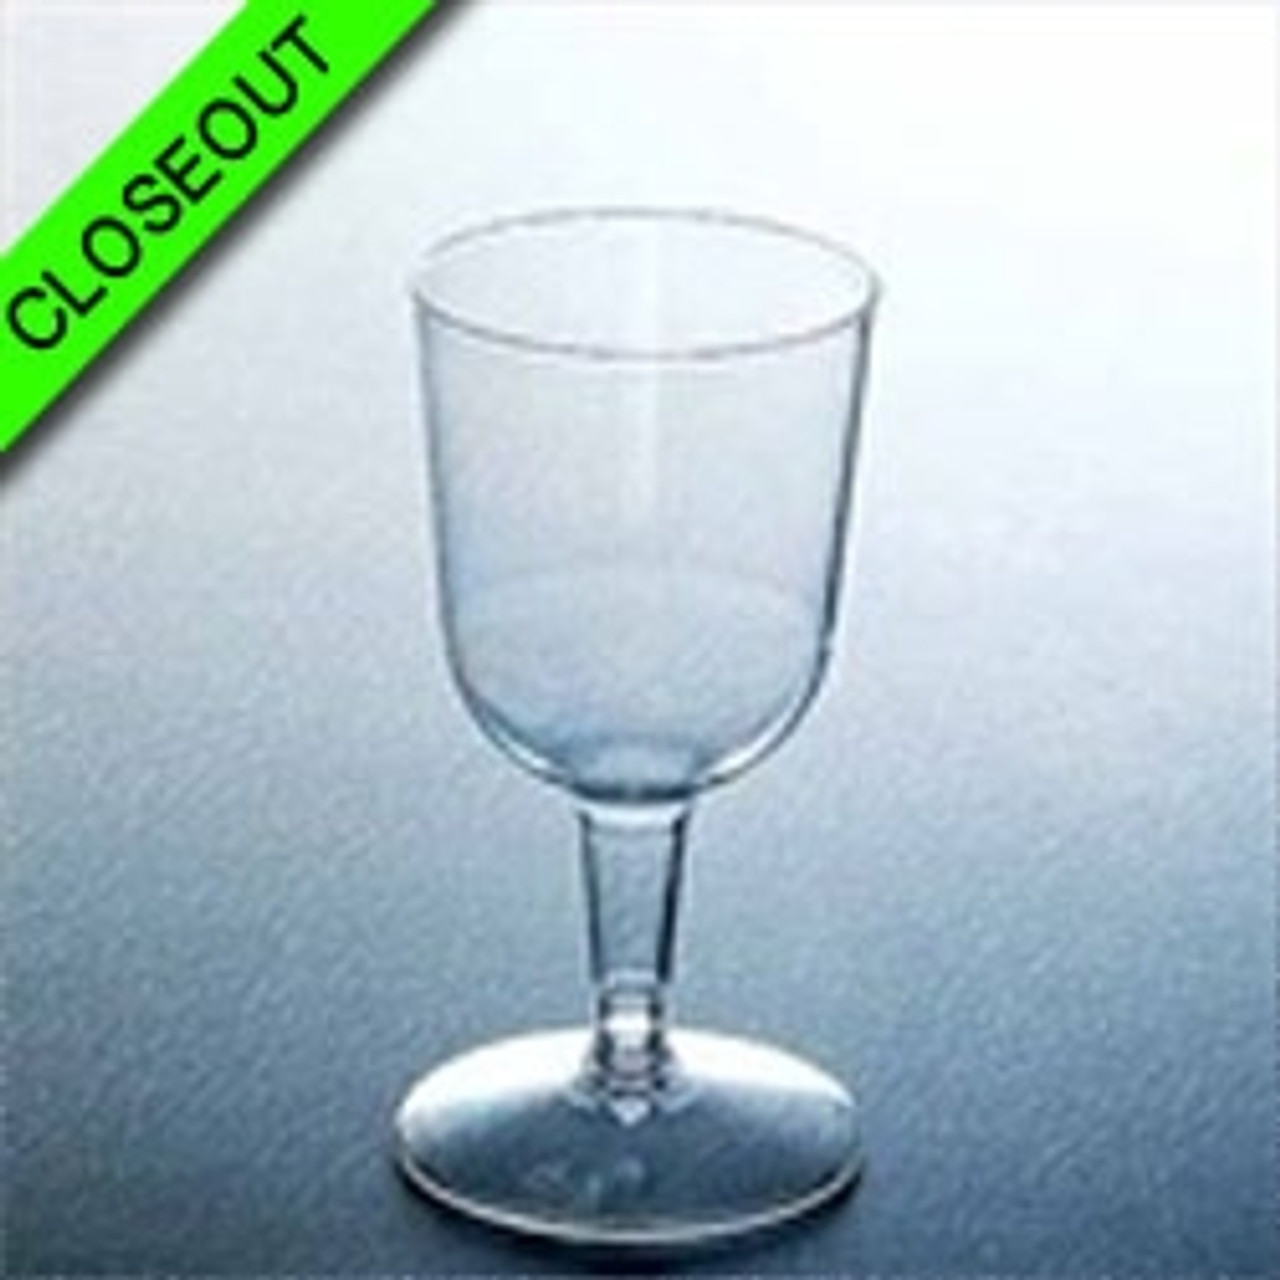 https://cdn11.bigcommerce.com/s-hgqmwywp99/images/stencil/1280x1280/products/49984/44770/cyber-blowout-clear-plastic-5-5oz-wine-glasses-8ct-3__65670.1675880360.jpg?c=1?imbypass=on